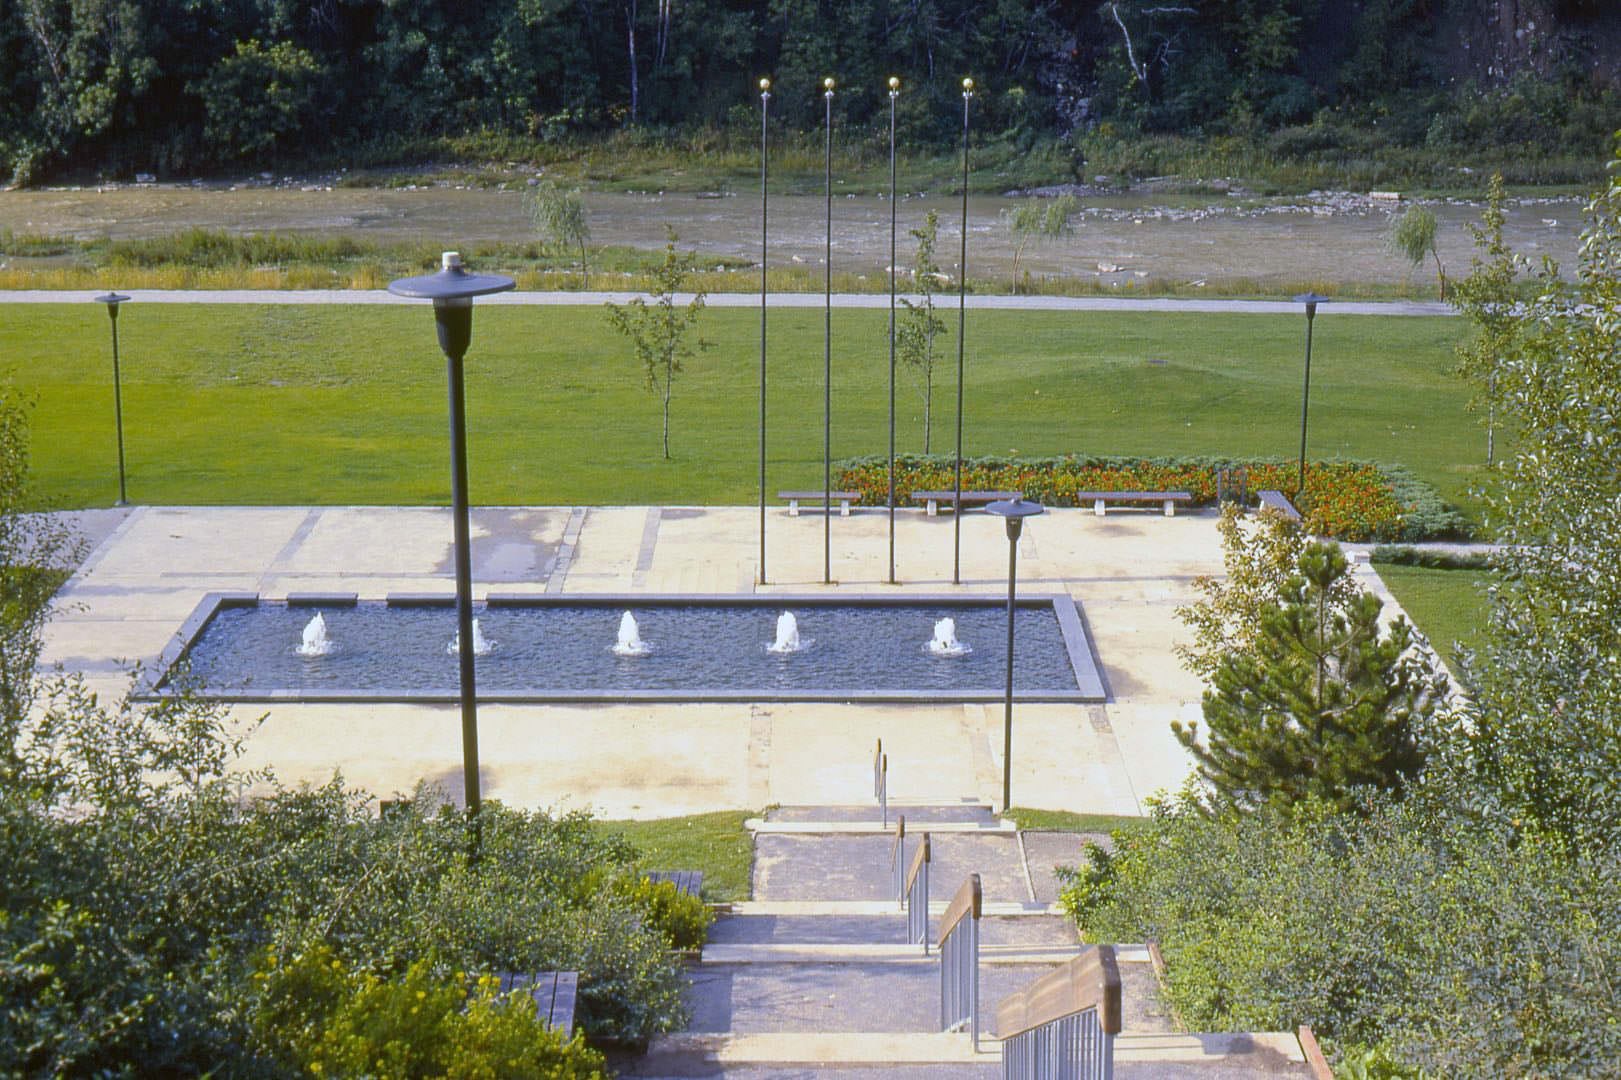 View of Cruickshank Park (2196 Weston Rd., at Lawrence), 1960s